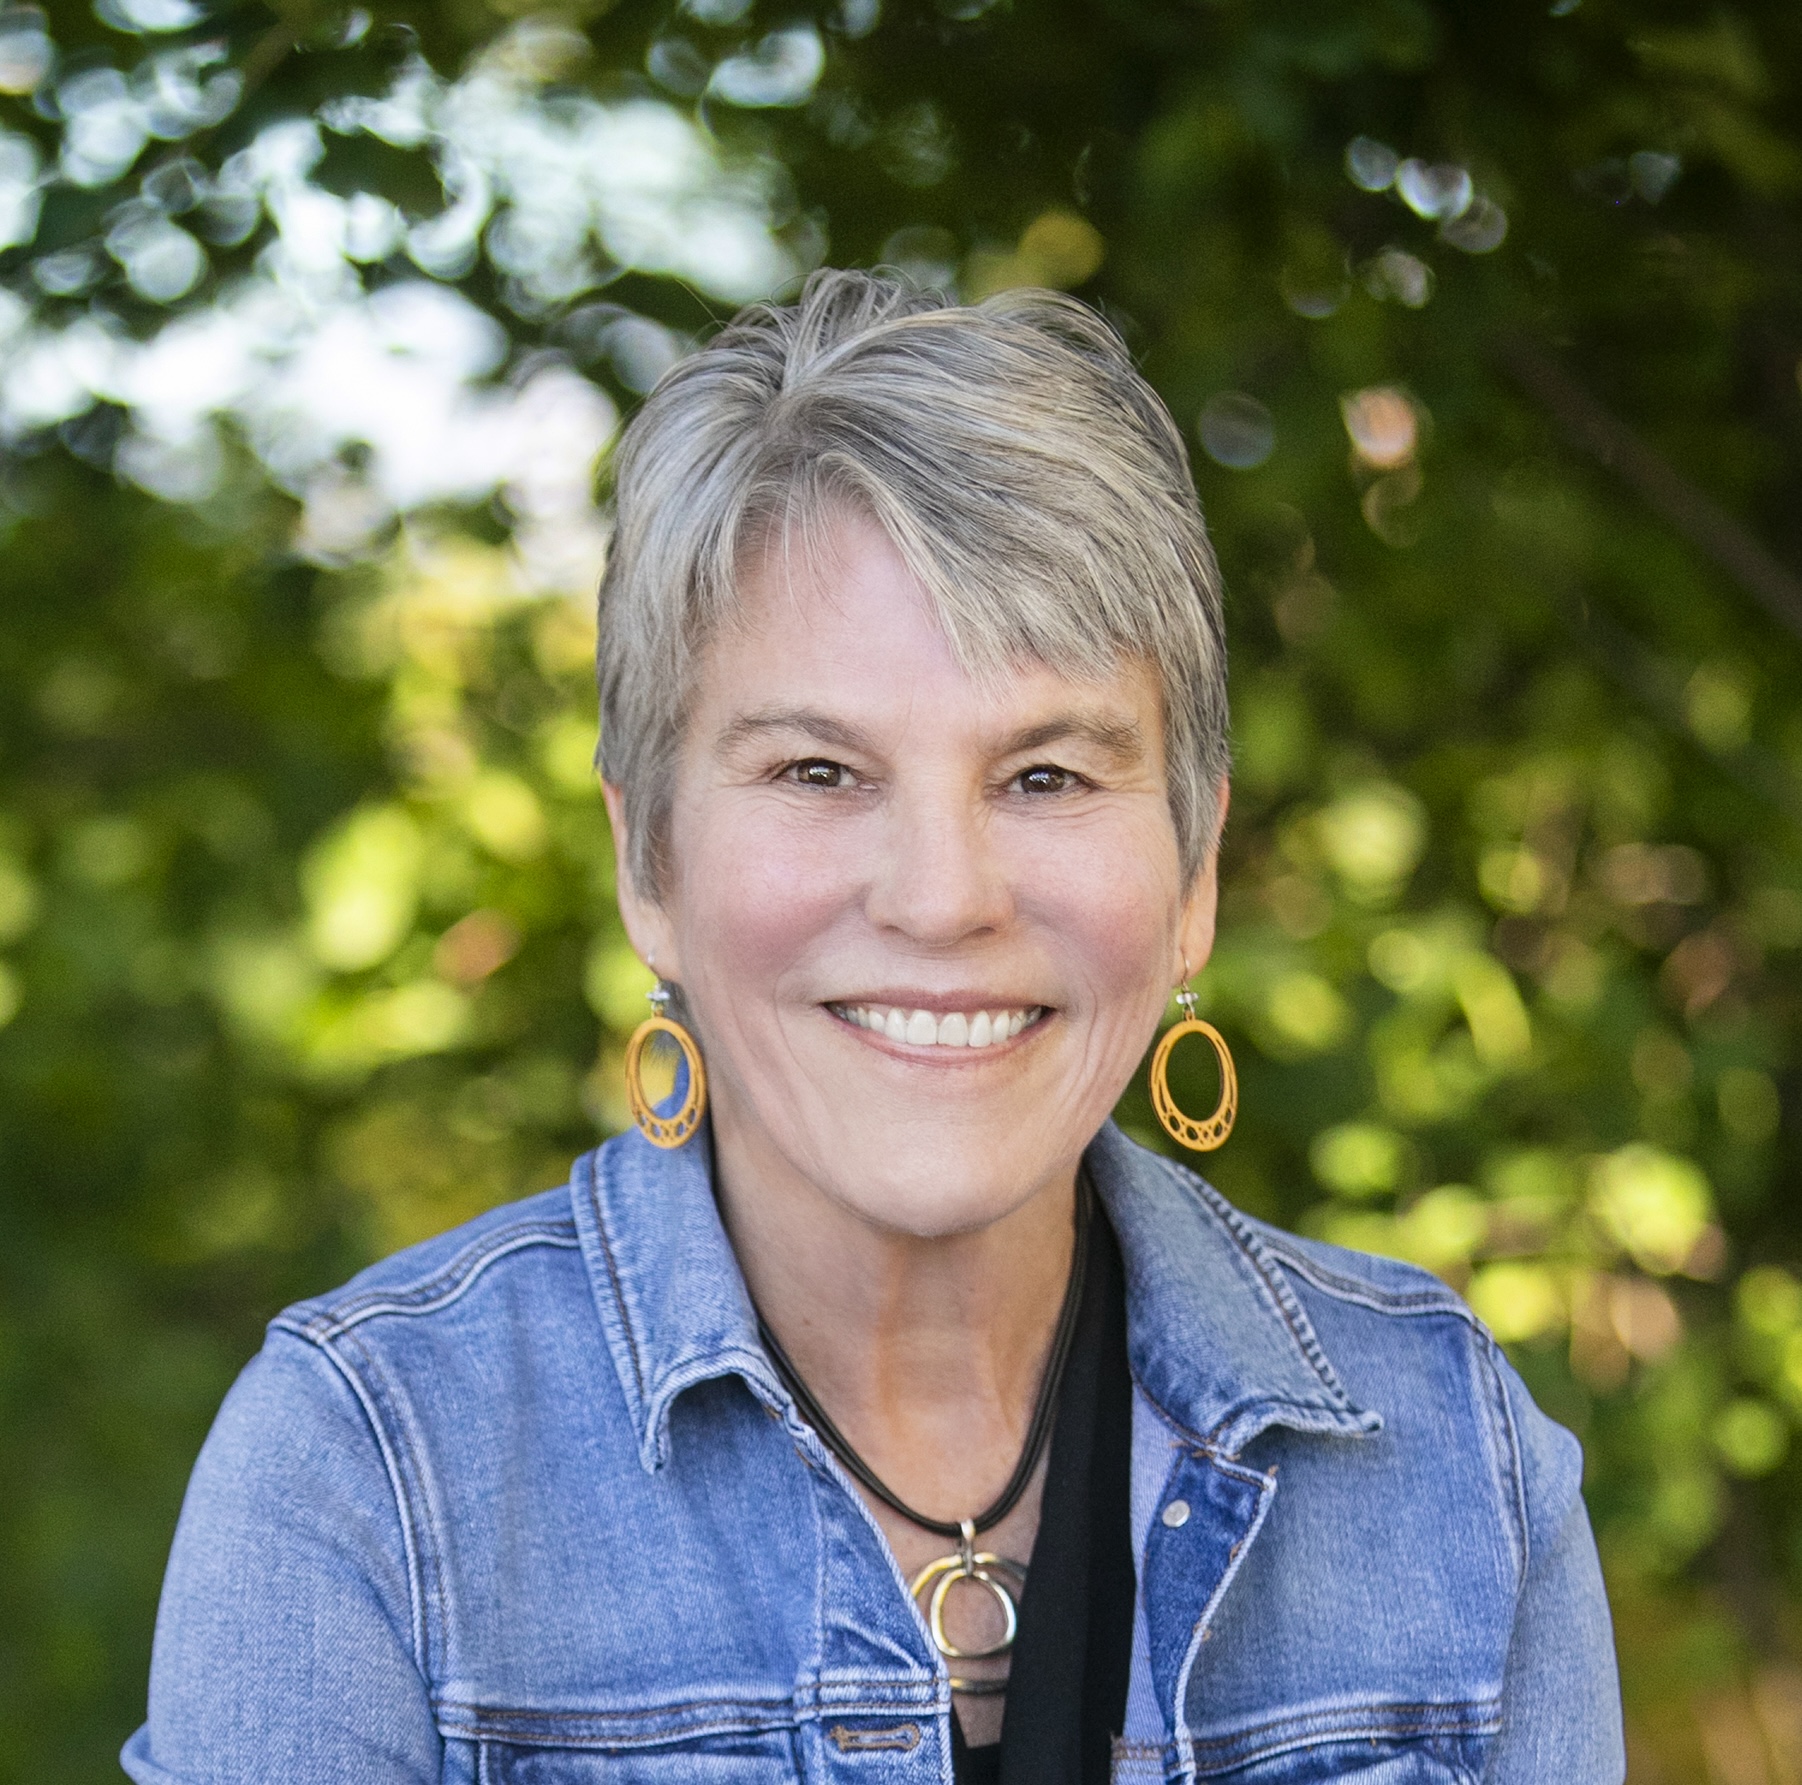 Jill Hughes of New Roots counseling is pictured in an outdoor portrait with a vibrant green background. She has short grey hair and wears a black top and denim jacket.